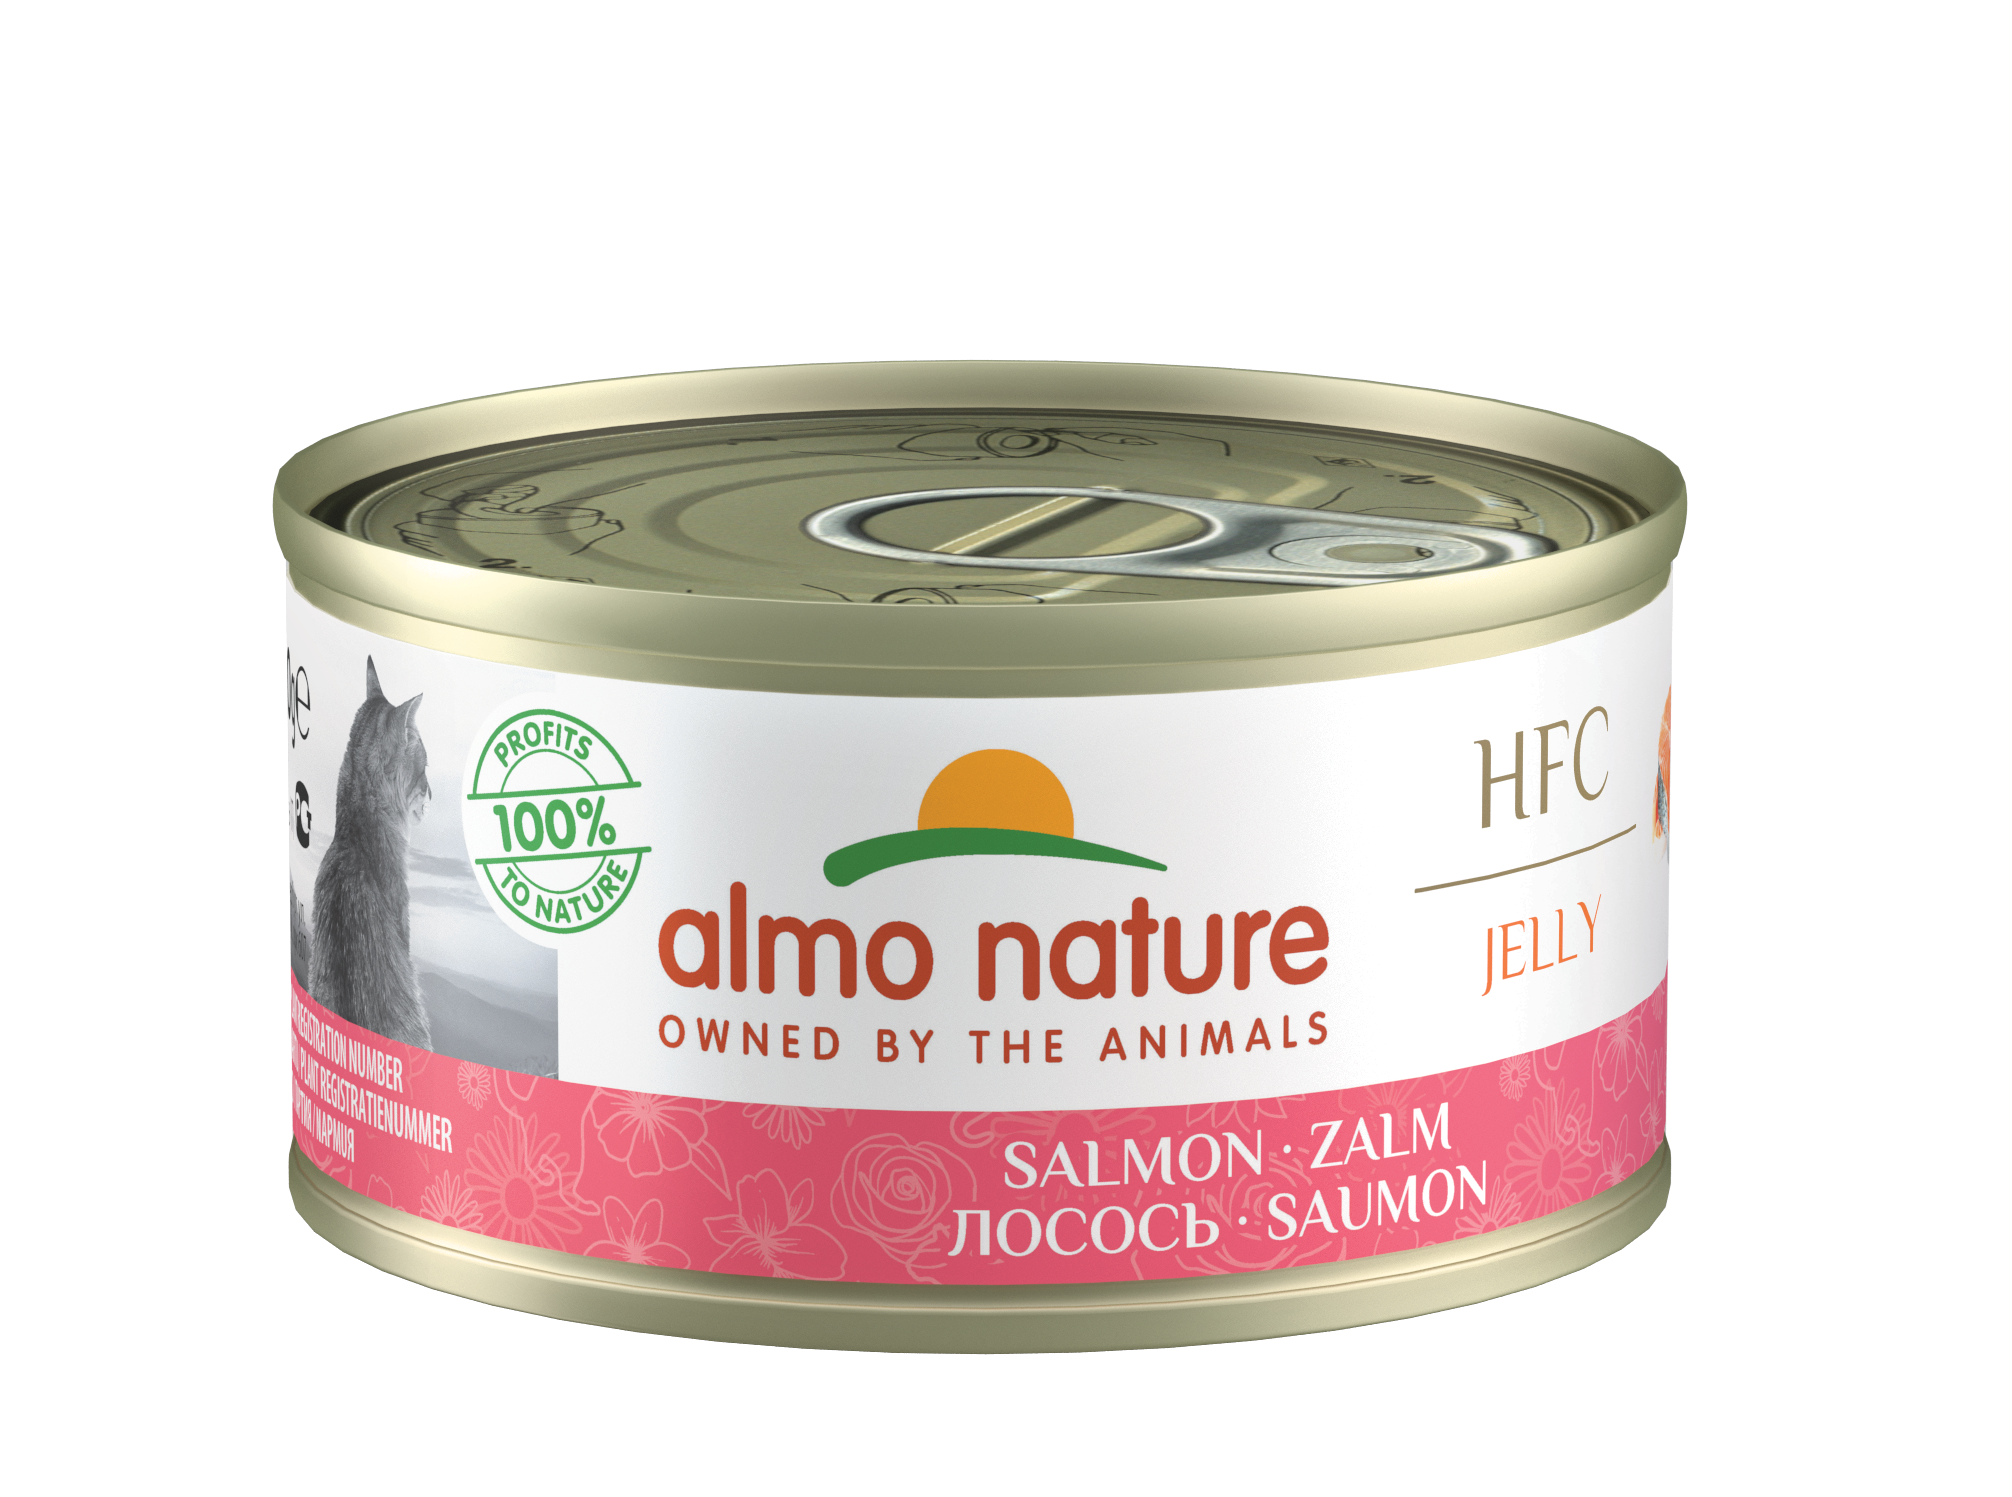 Almo Nature - HFC Natural Salmon 70g for Cats